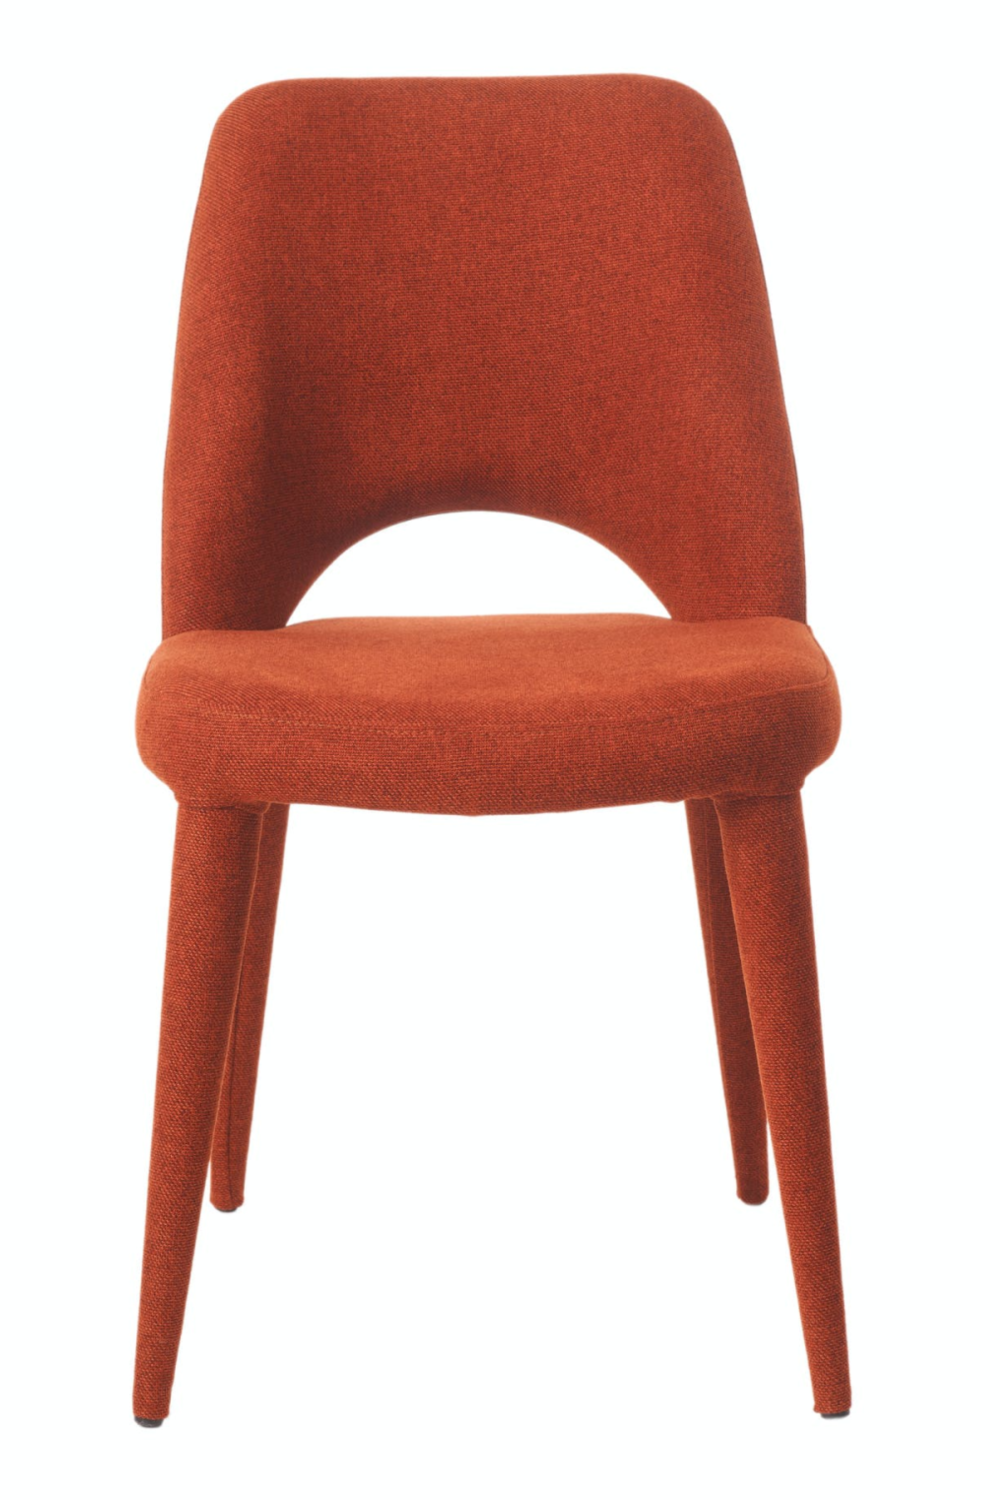 Red Dining Chair Pols Potten Holy Pols Potten - OROA